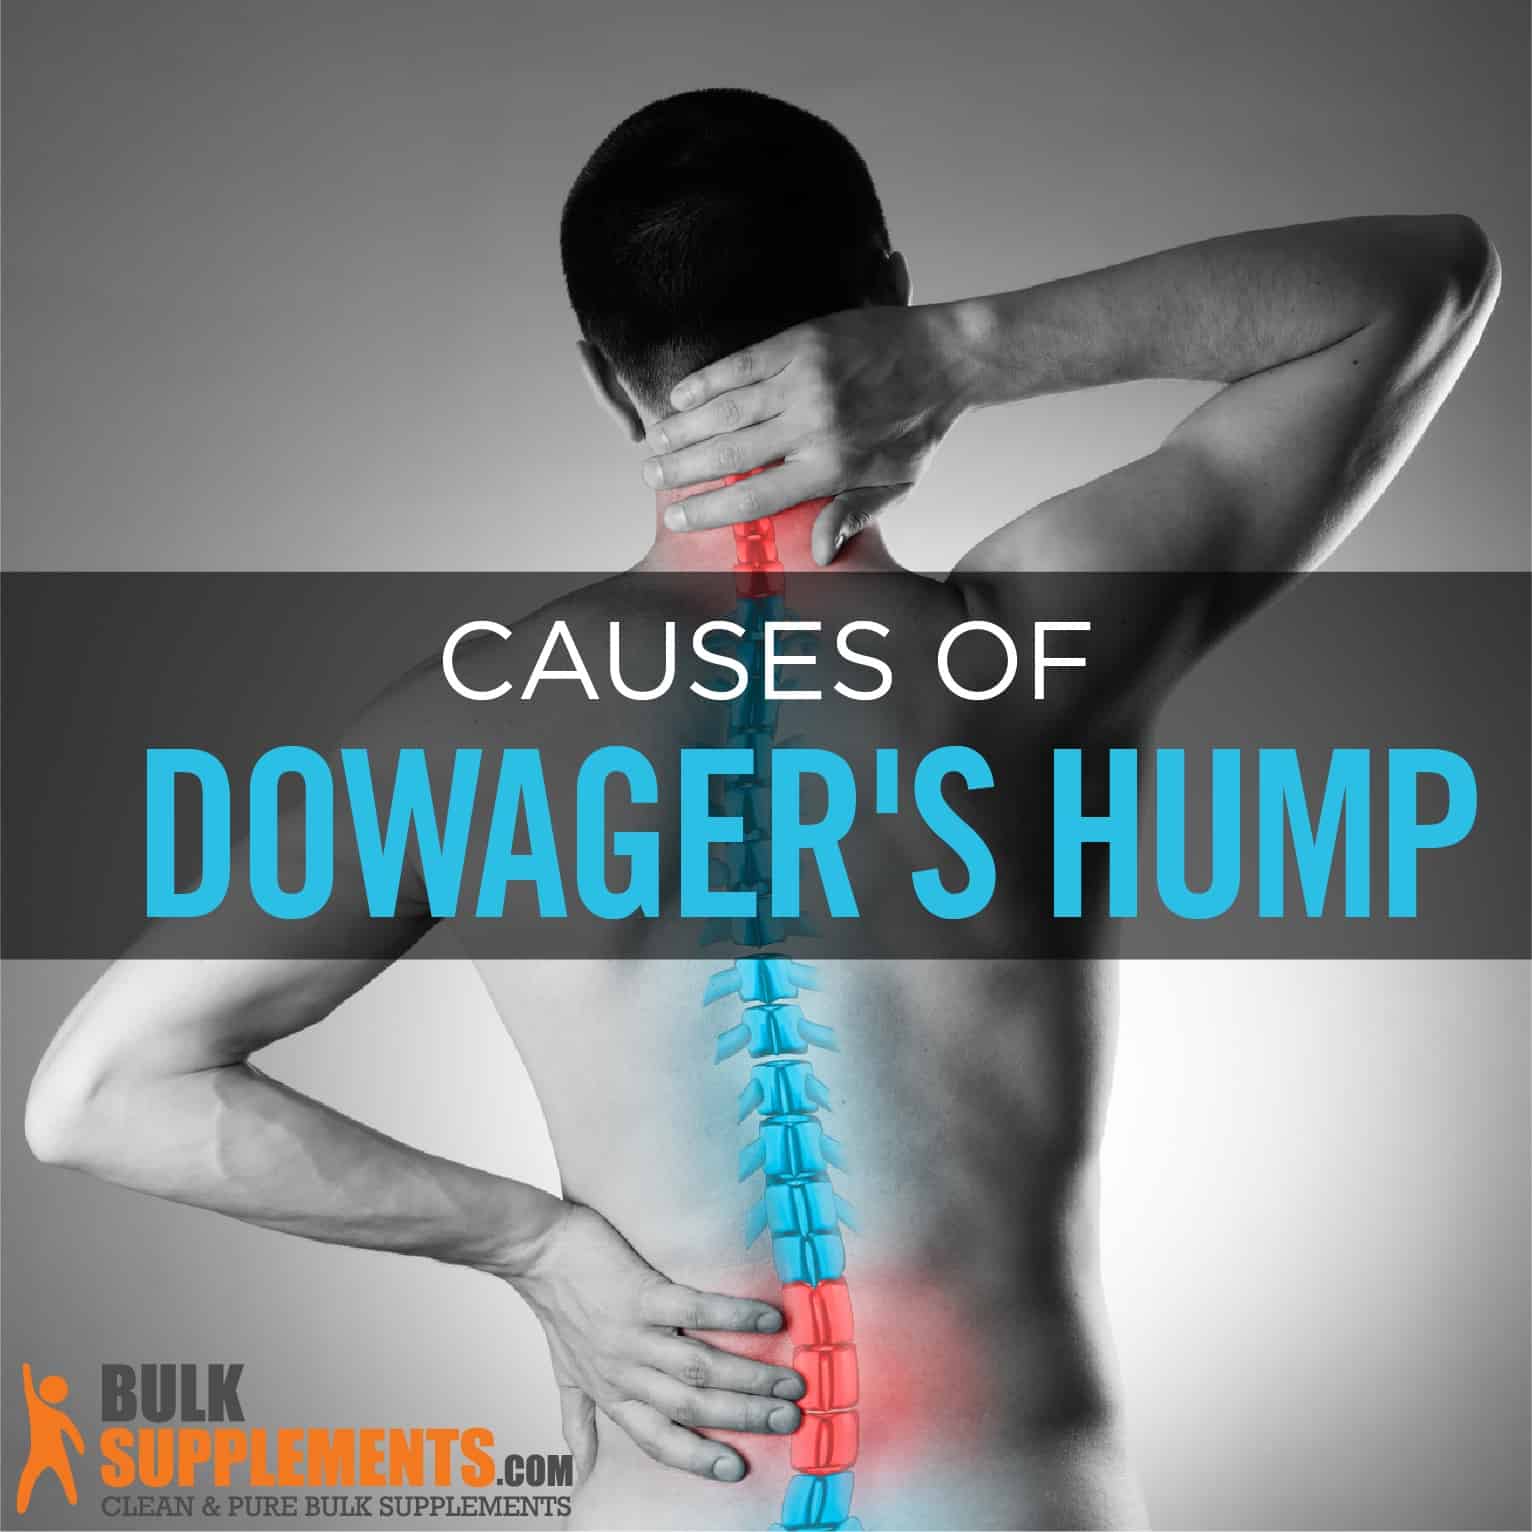 2 Exercises To Help You Prevent Dowager's Hump